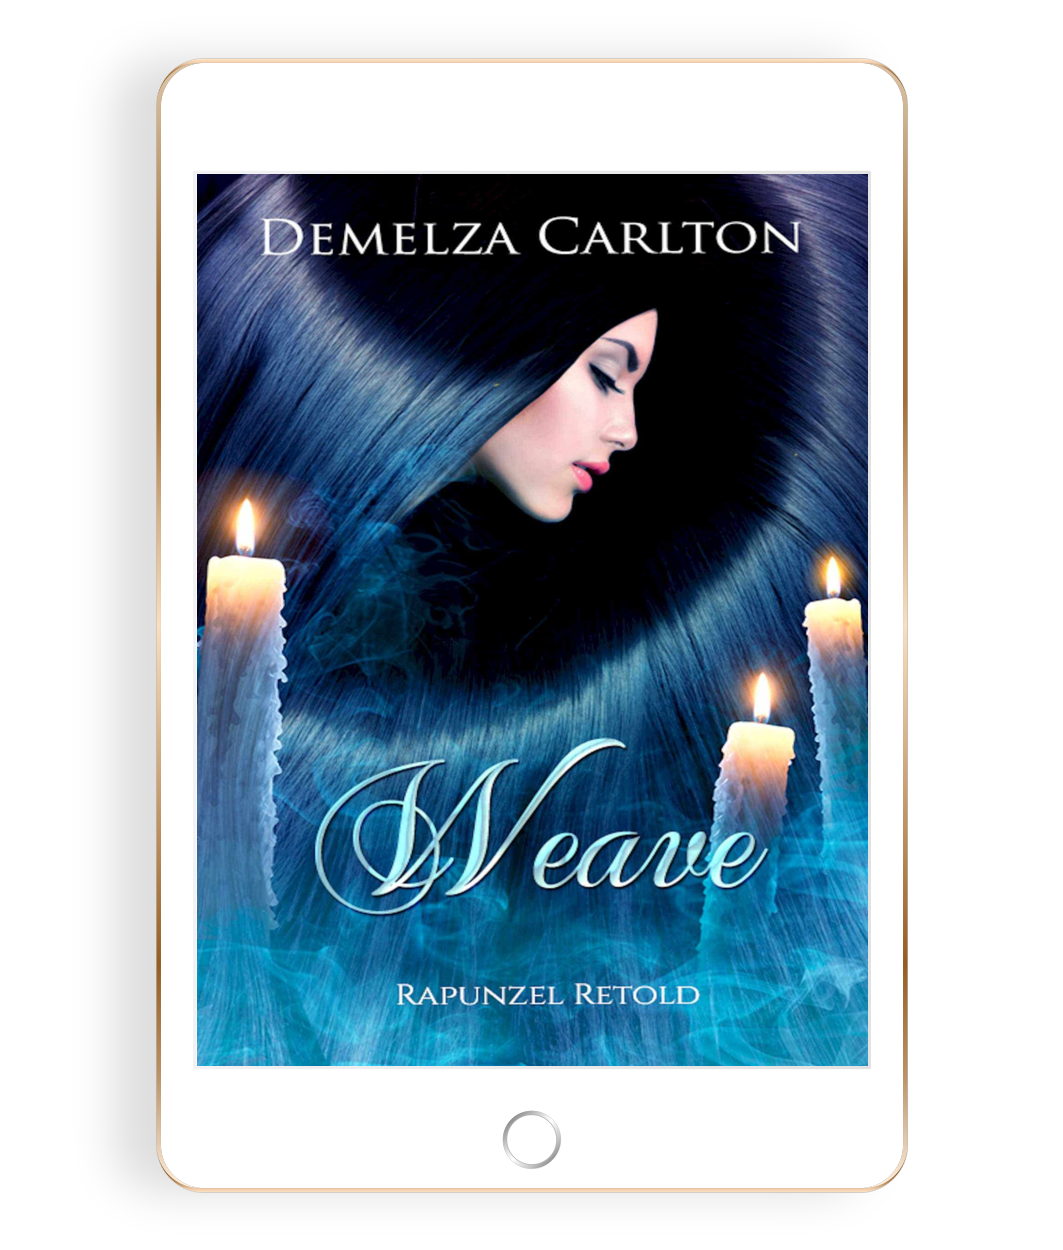 A steamy romantasy fairytale retelling of Rapunzel for fans of Sarah J Maas, ACOTAR, Raven Kennedy, Charlaine Harris, Juliet Marillier and Rebecca Yarros